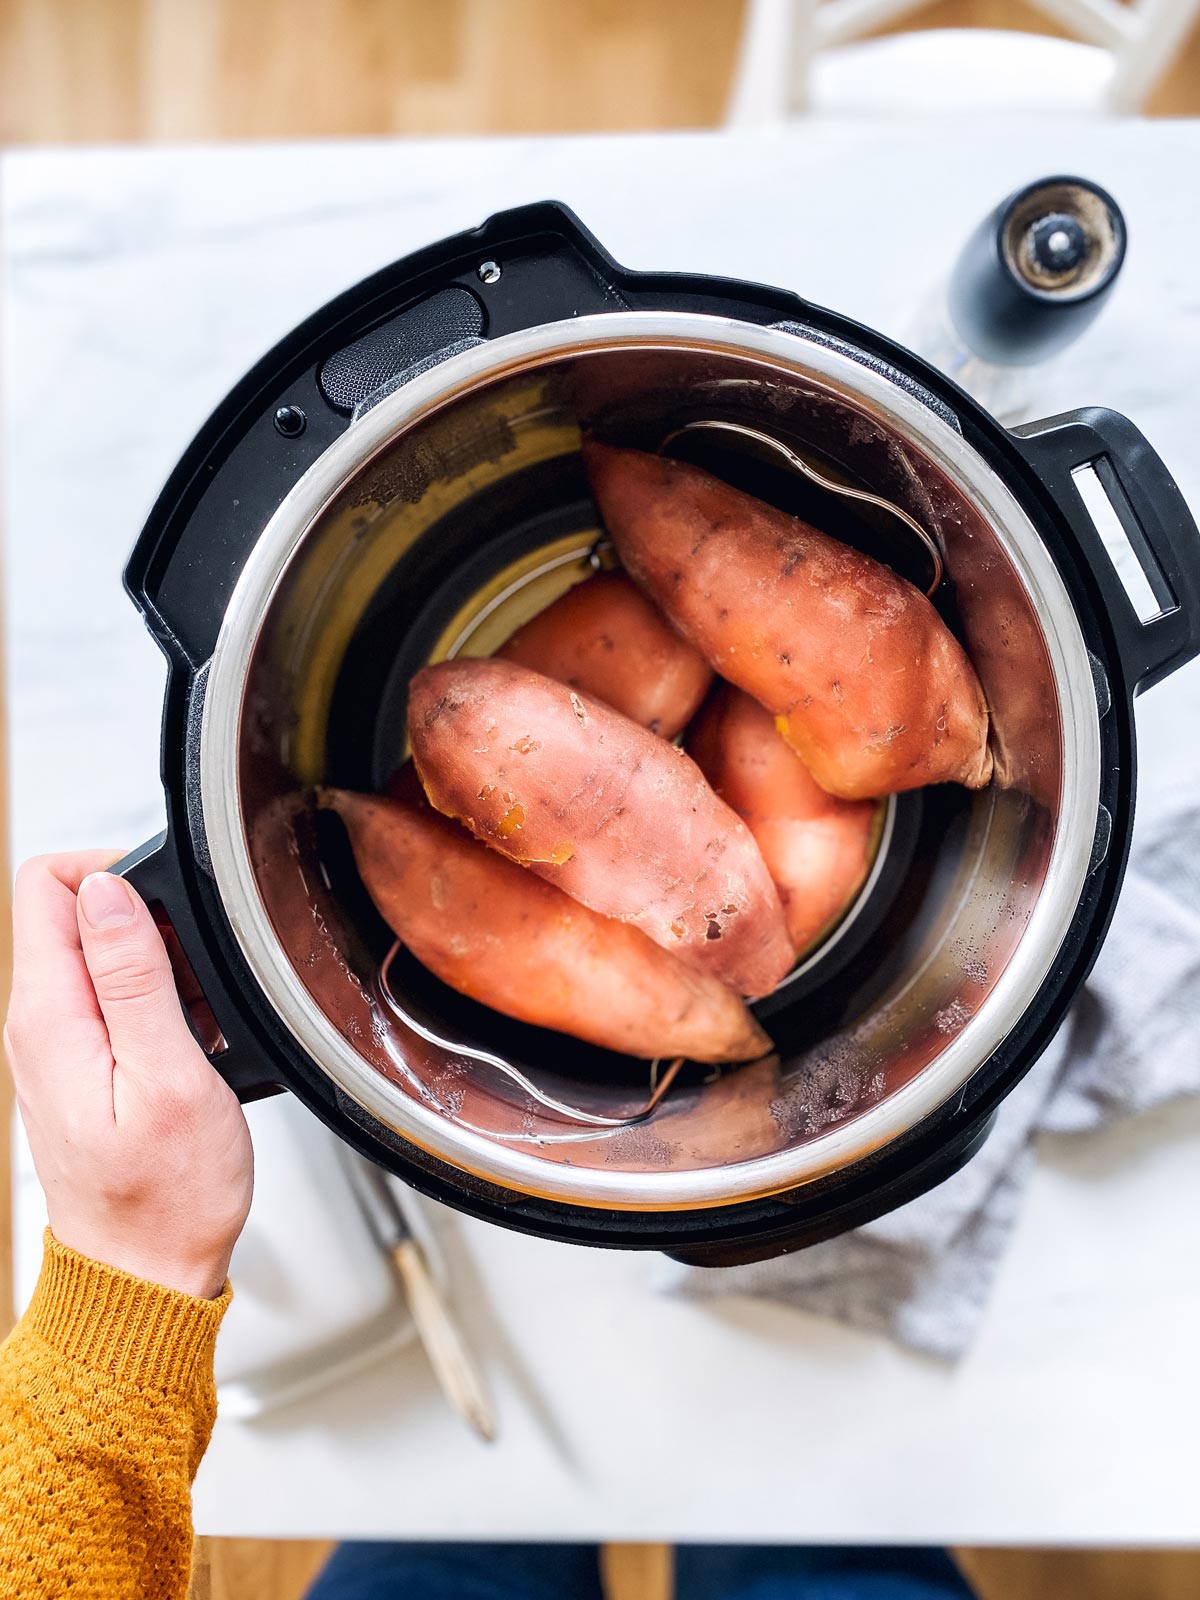 How To Cook Sweet Potatoes In The Electric Pressure Cooker